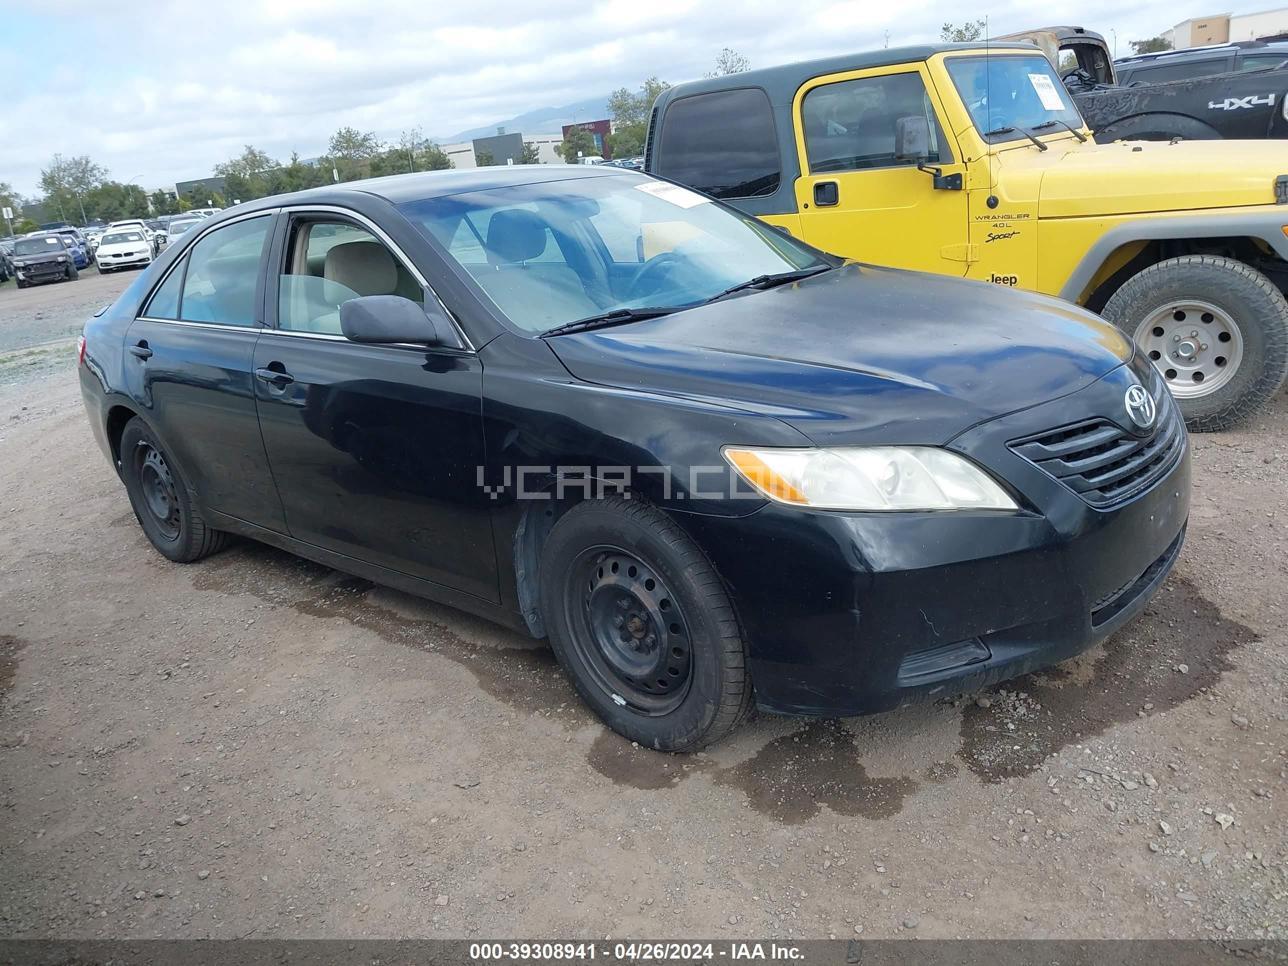 VIN: 4T4BE46K39R064311 - toyota camry